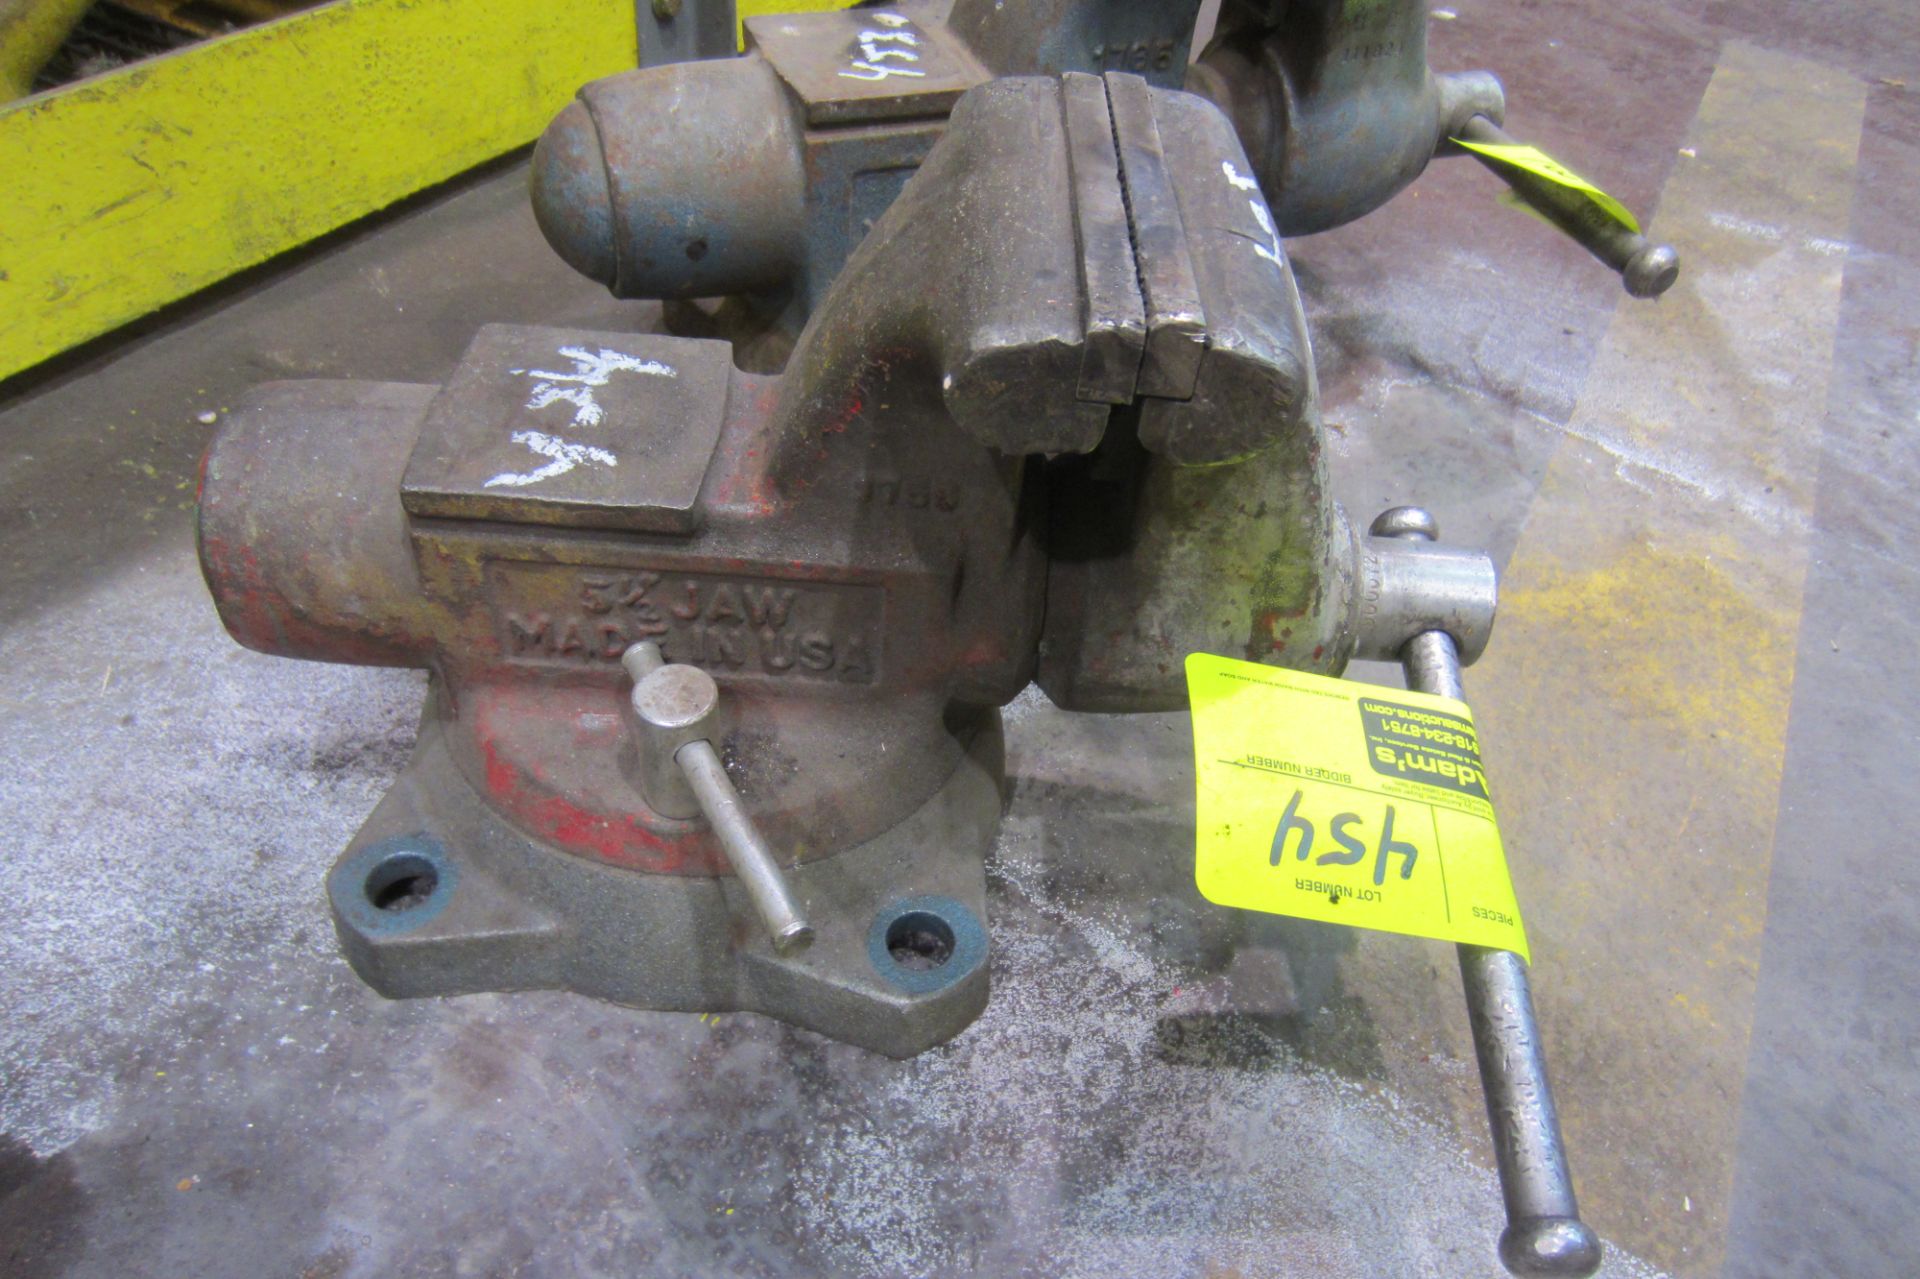 VISE WITH 5 1/2" JAW